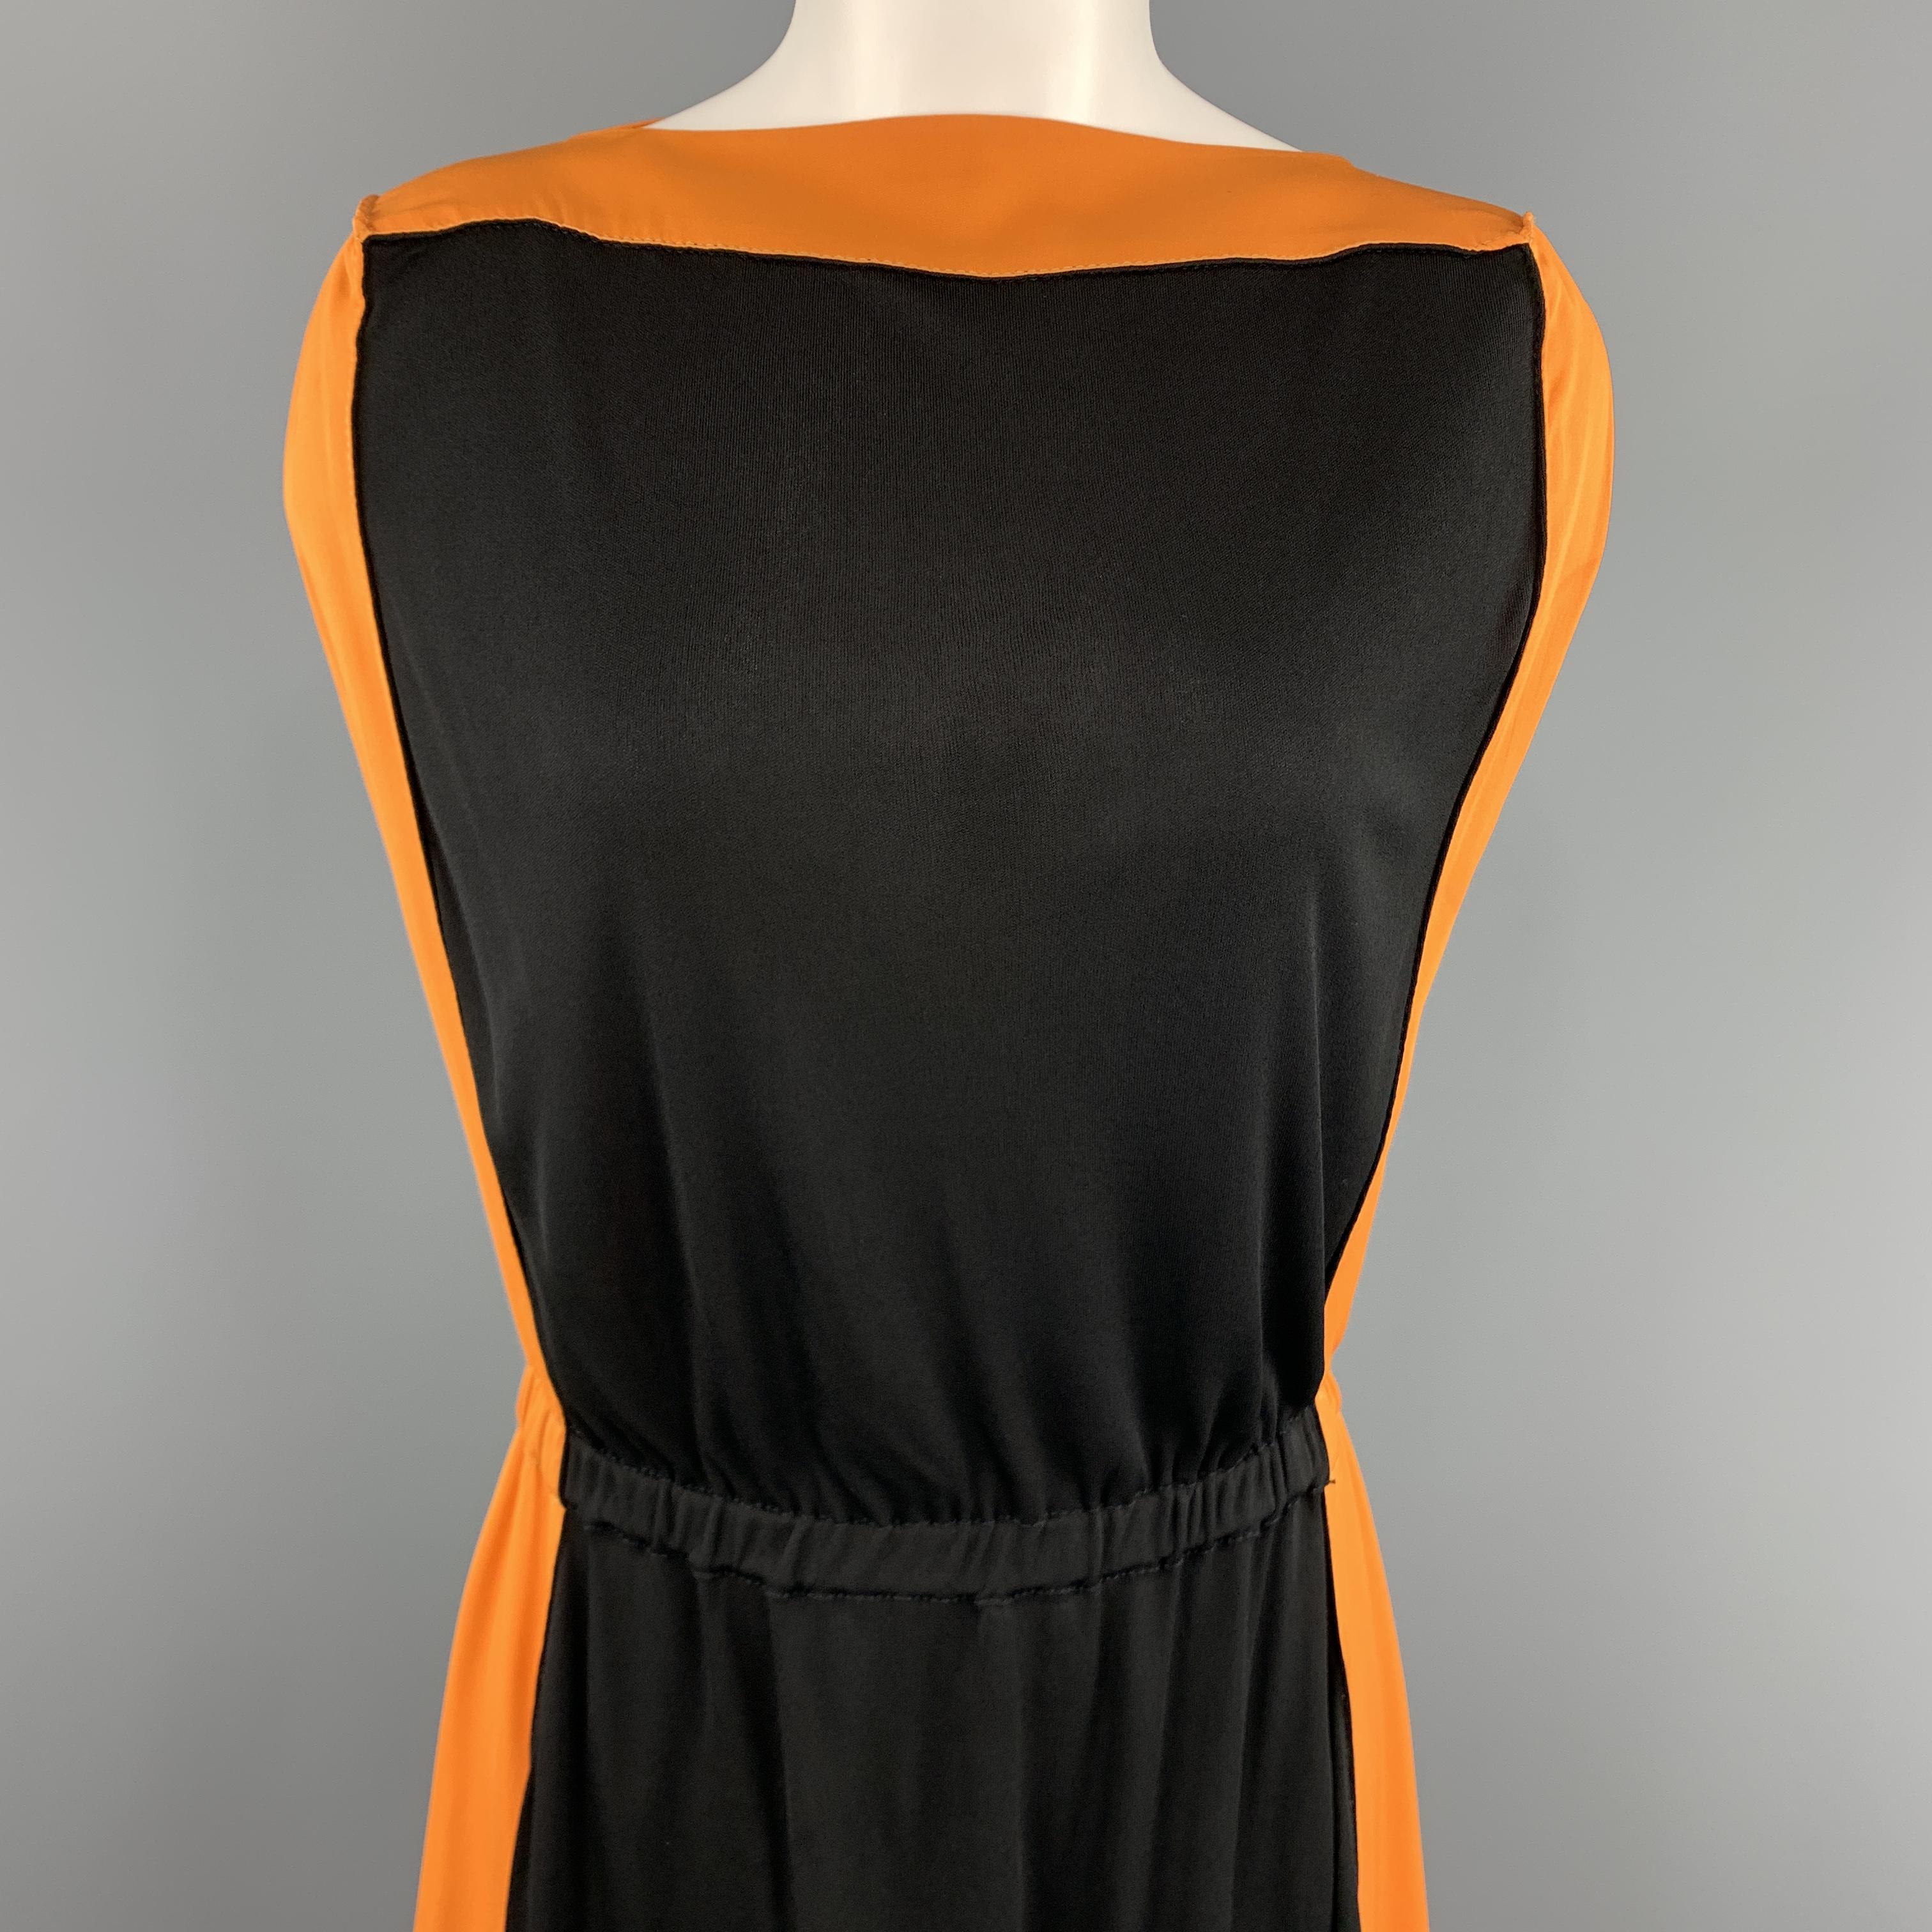 VIONNET shift dress comes in black and golden orange viscose jersey with a boat neckline, squared shoulder with sleeveless slit arm, A line silhouette, and elastic gathered waistband. Made in Italy.

Very Good Pre-Owned Condition.
Marked: IT